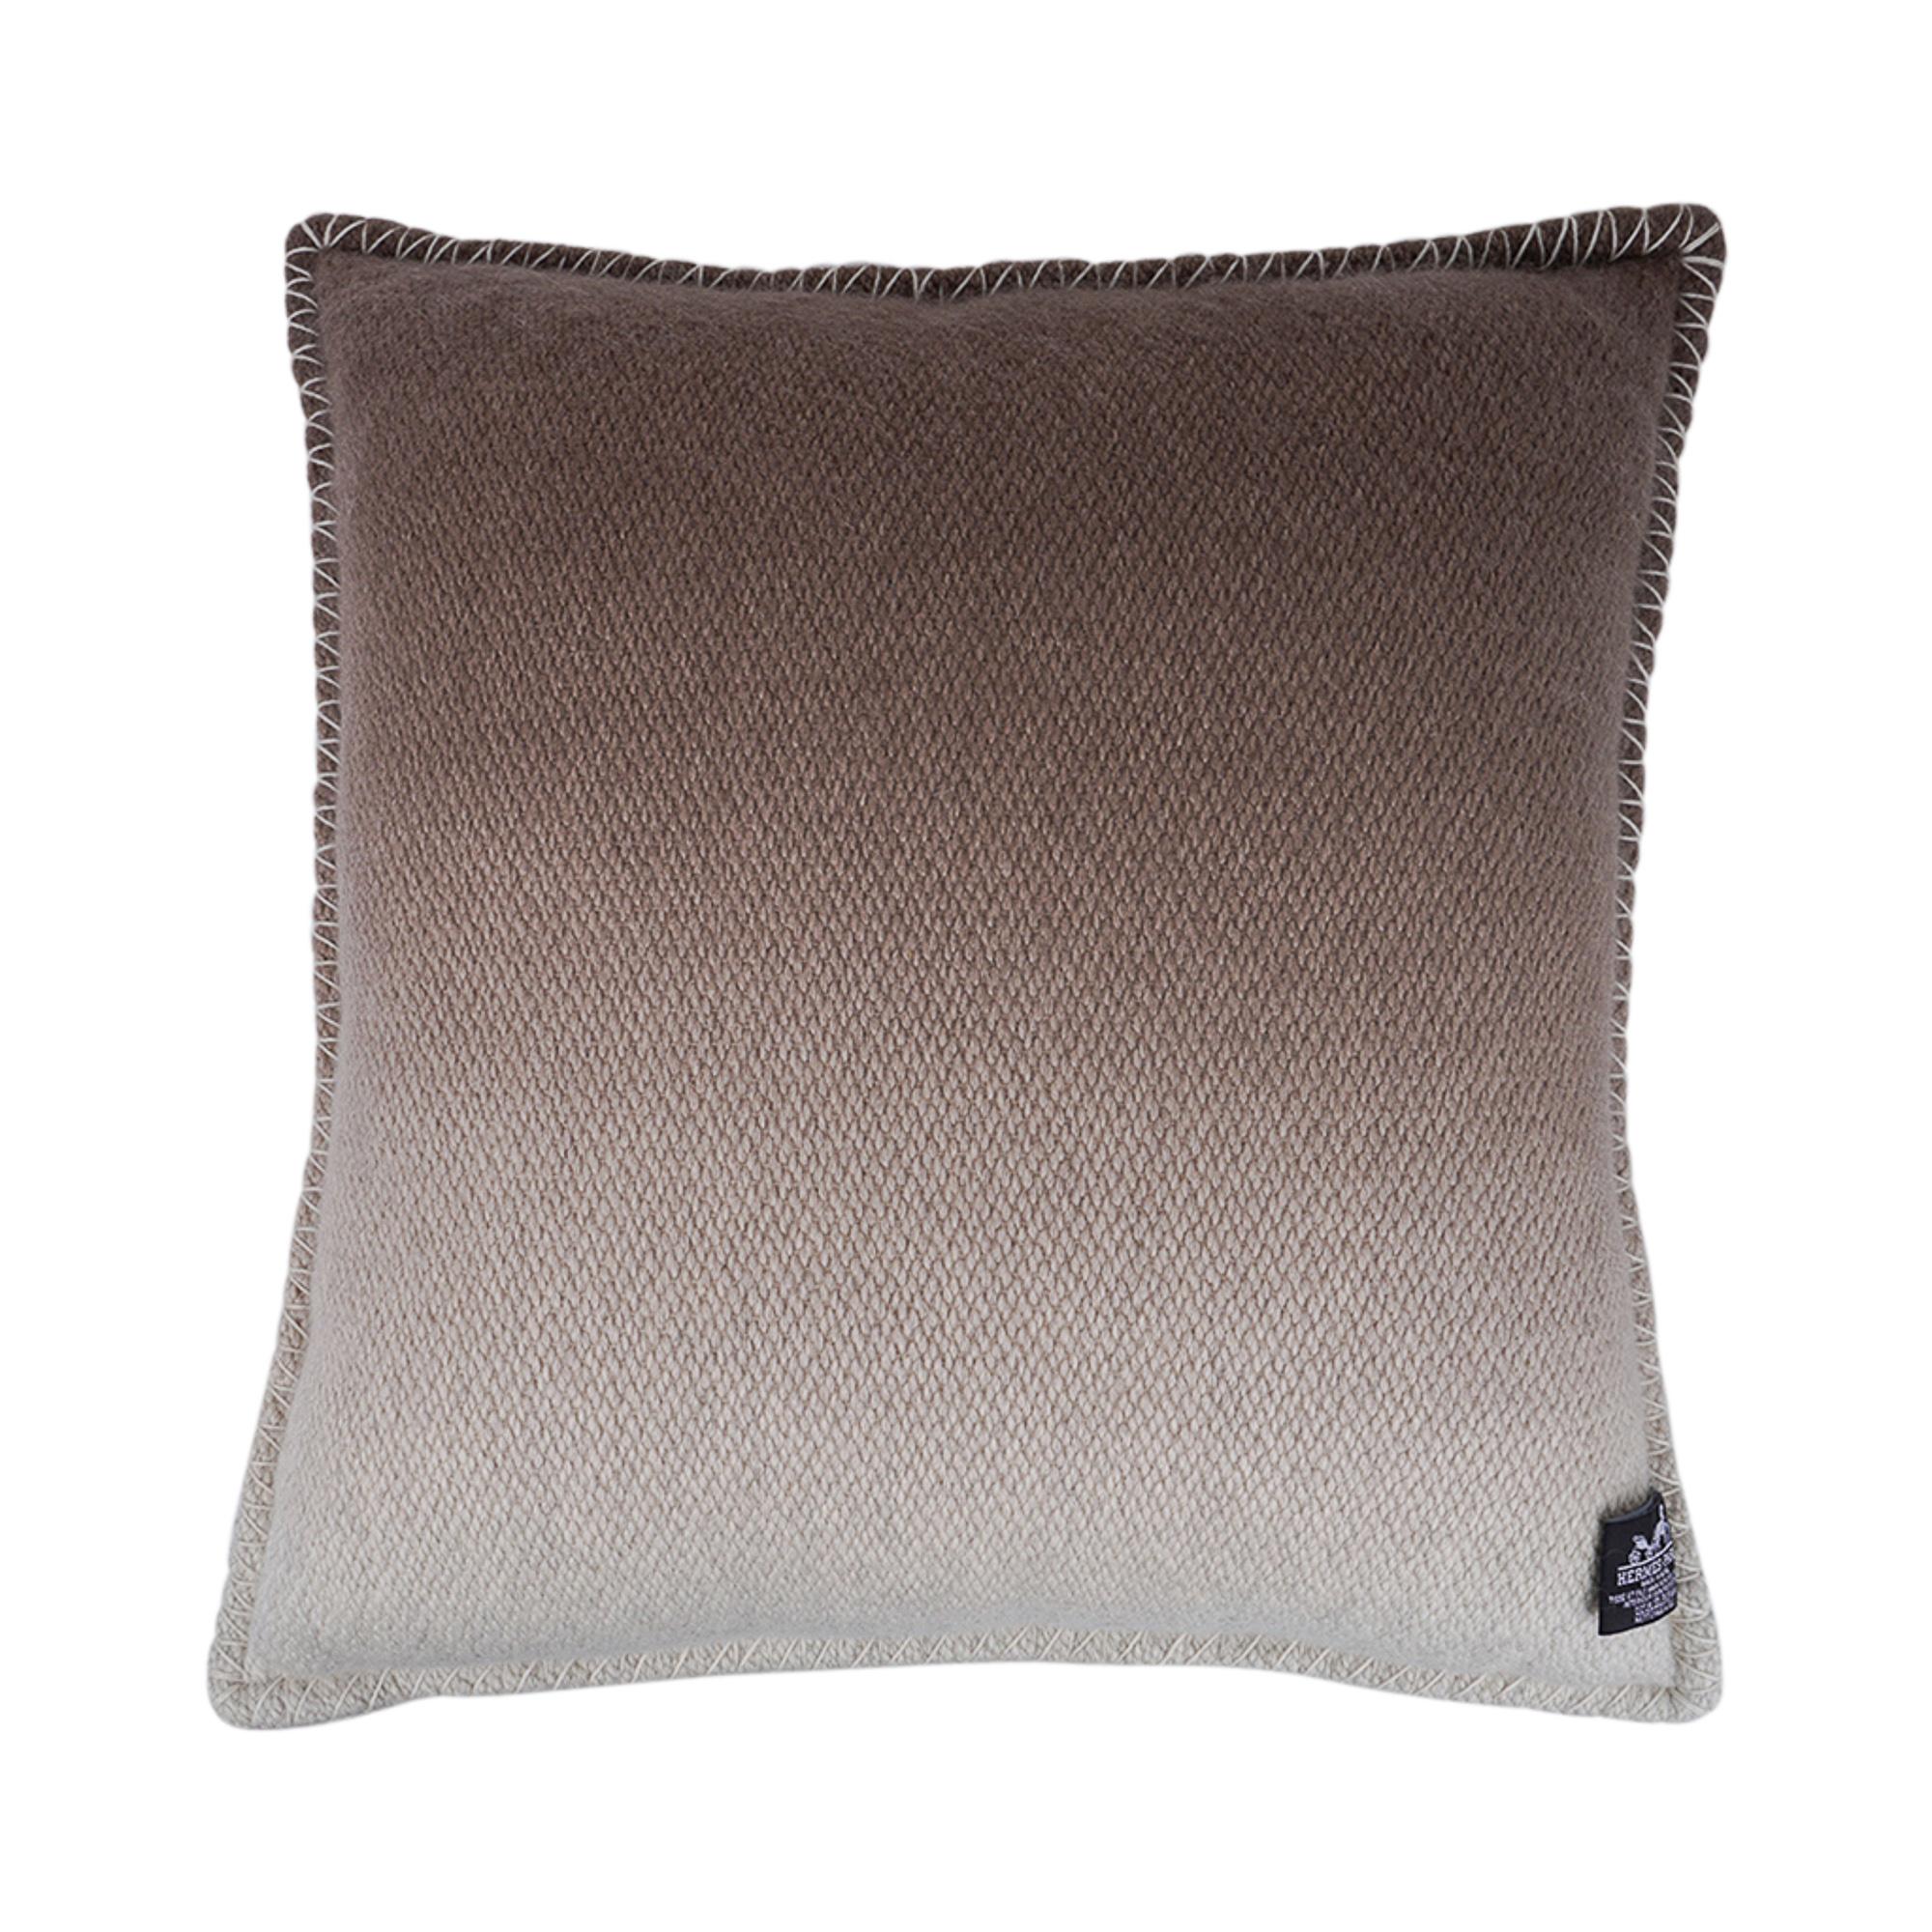 Hermes Yack n' Dye Ombre Pillow Gris / Naturel For Sale 2